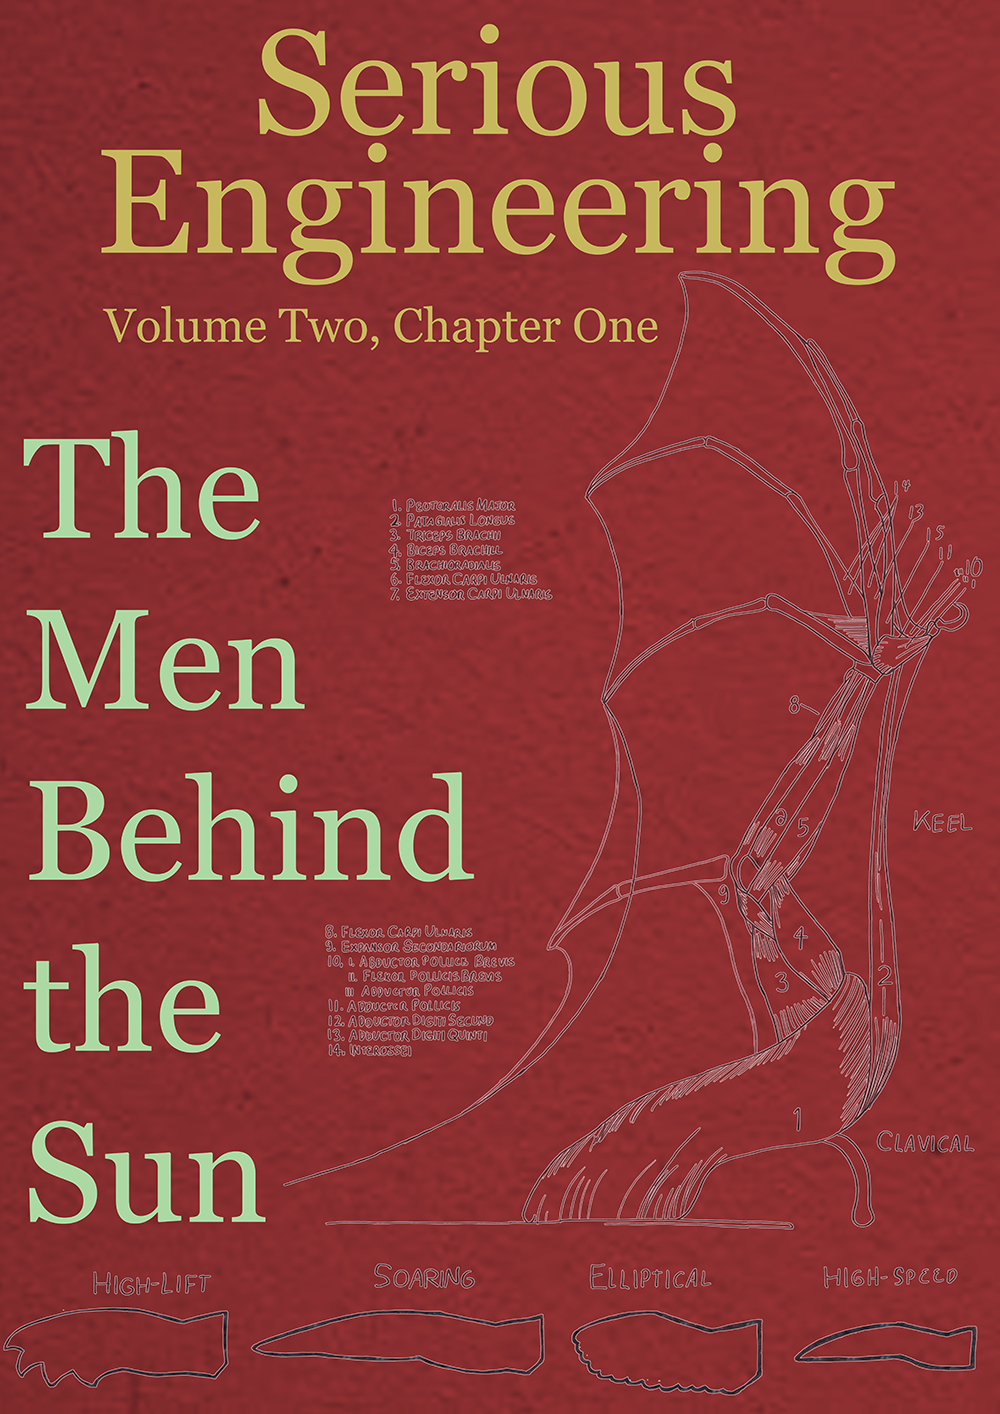 Vol 2 Ch 1 The Men Behind the Sun cover